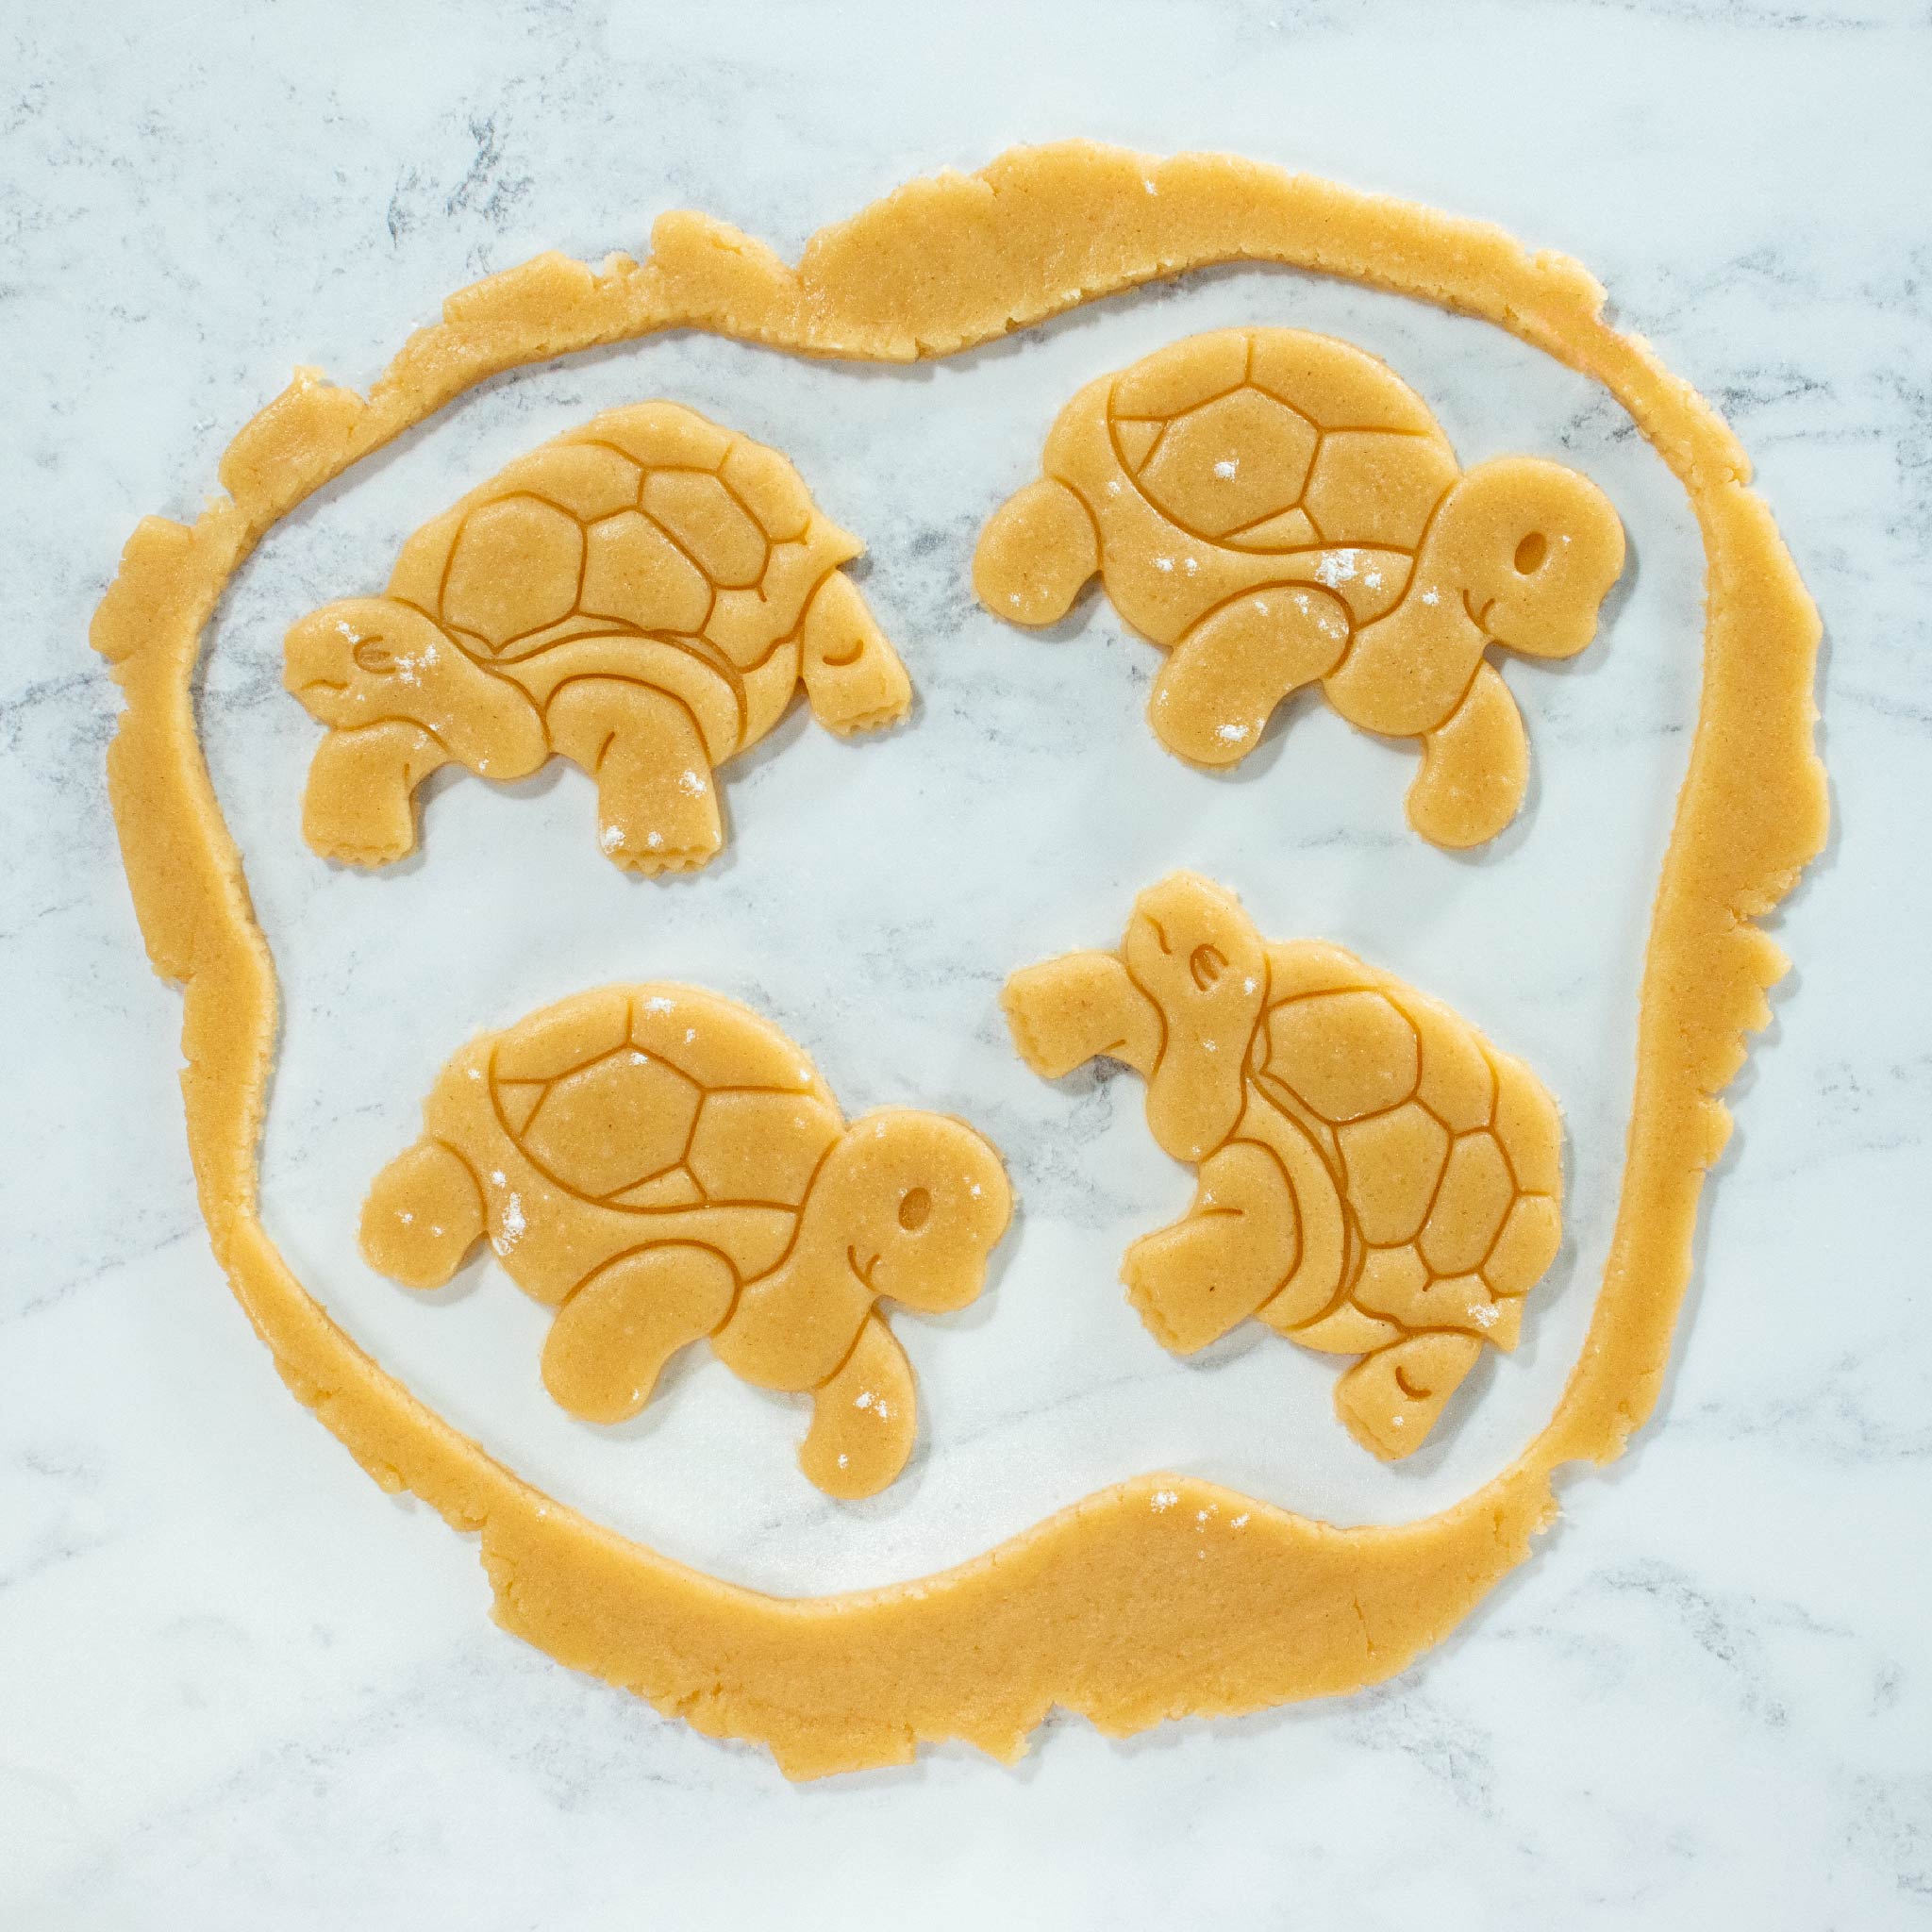 bakerlogy wise tortoise and cute tortoise cookie cutout dough